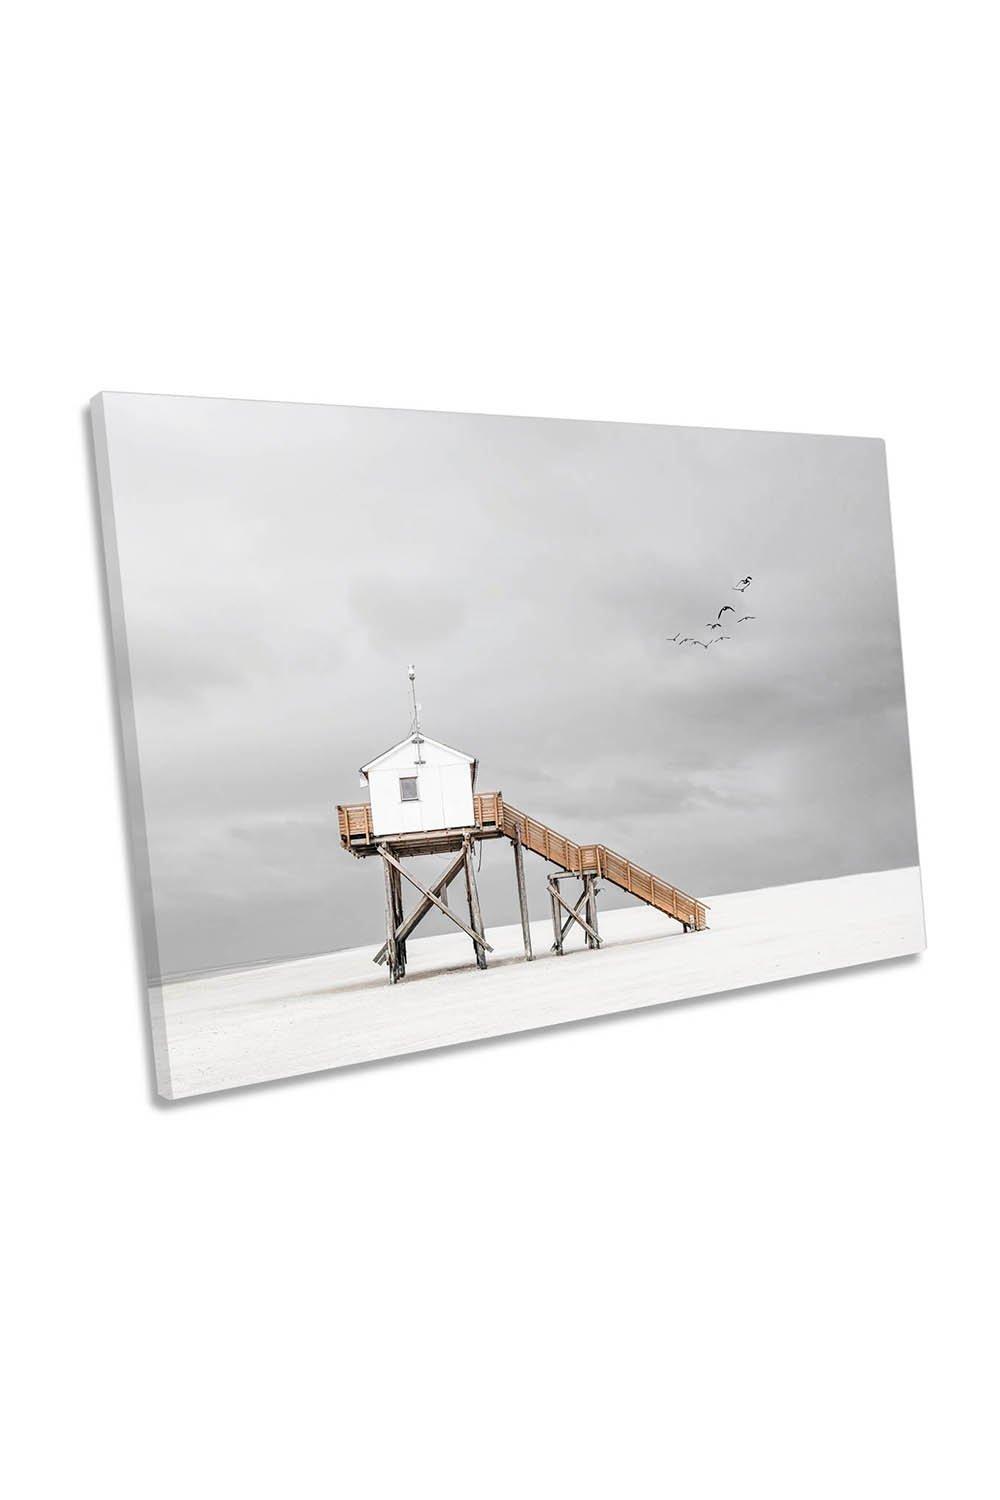 On the Beach Lifeguard Tower Canvas Wall Art Picture Print